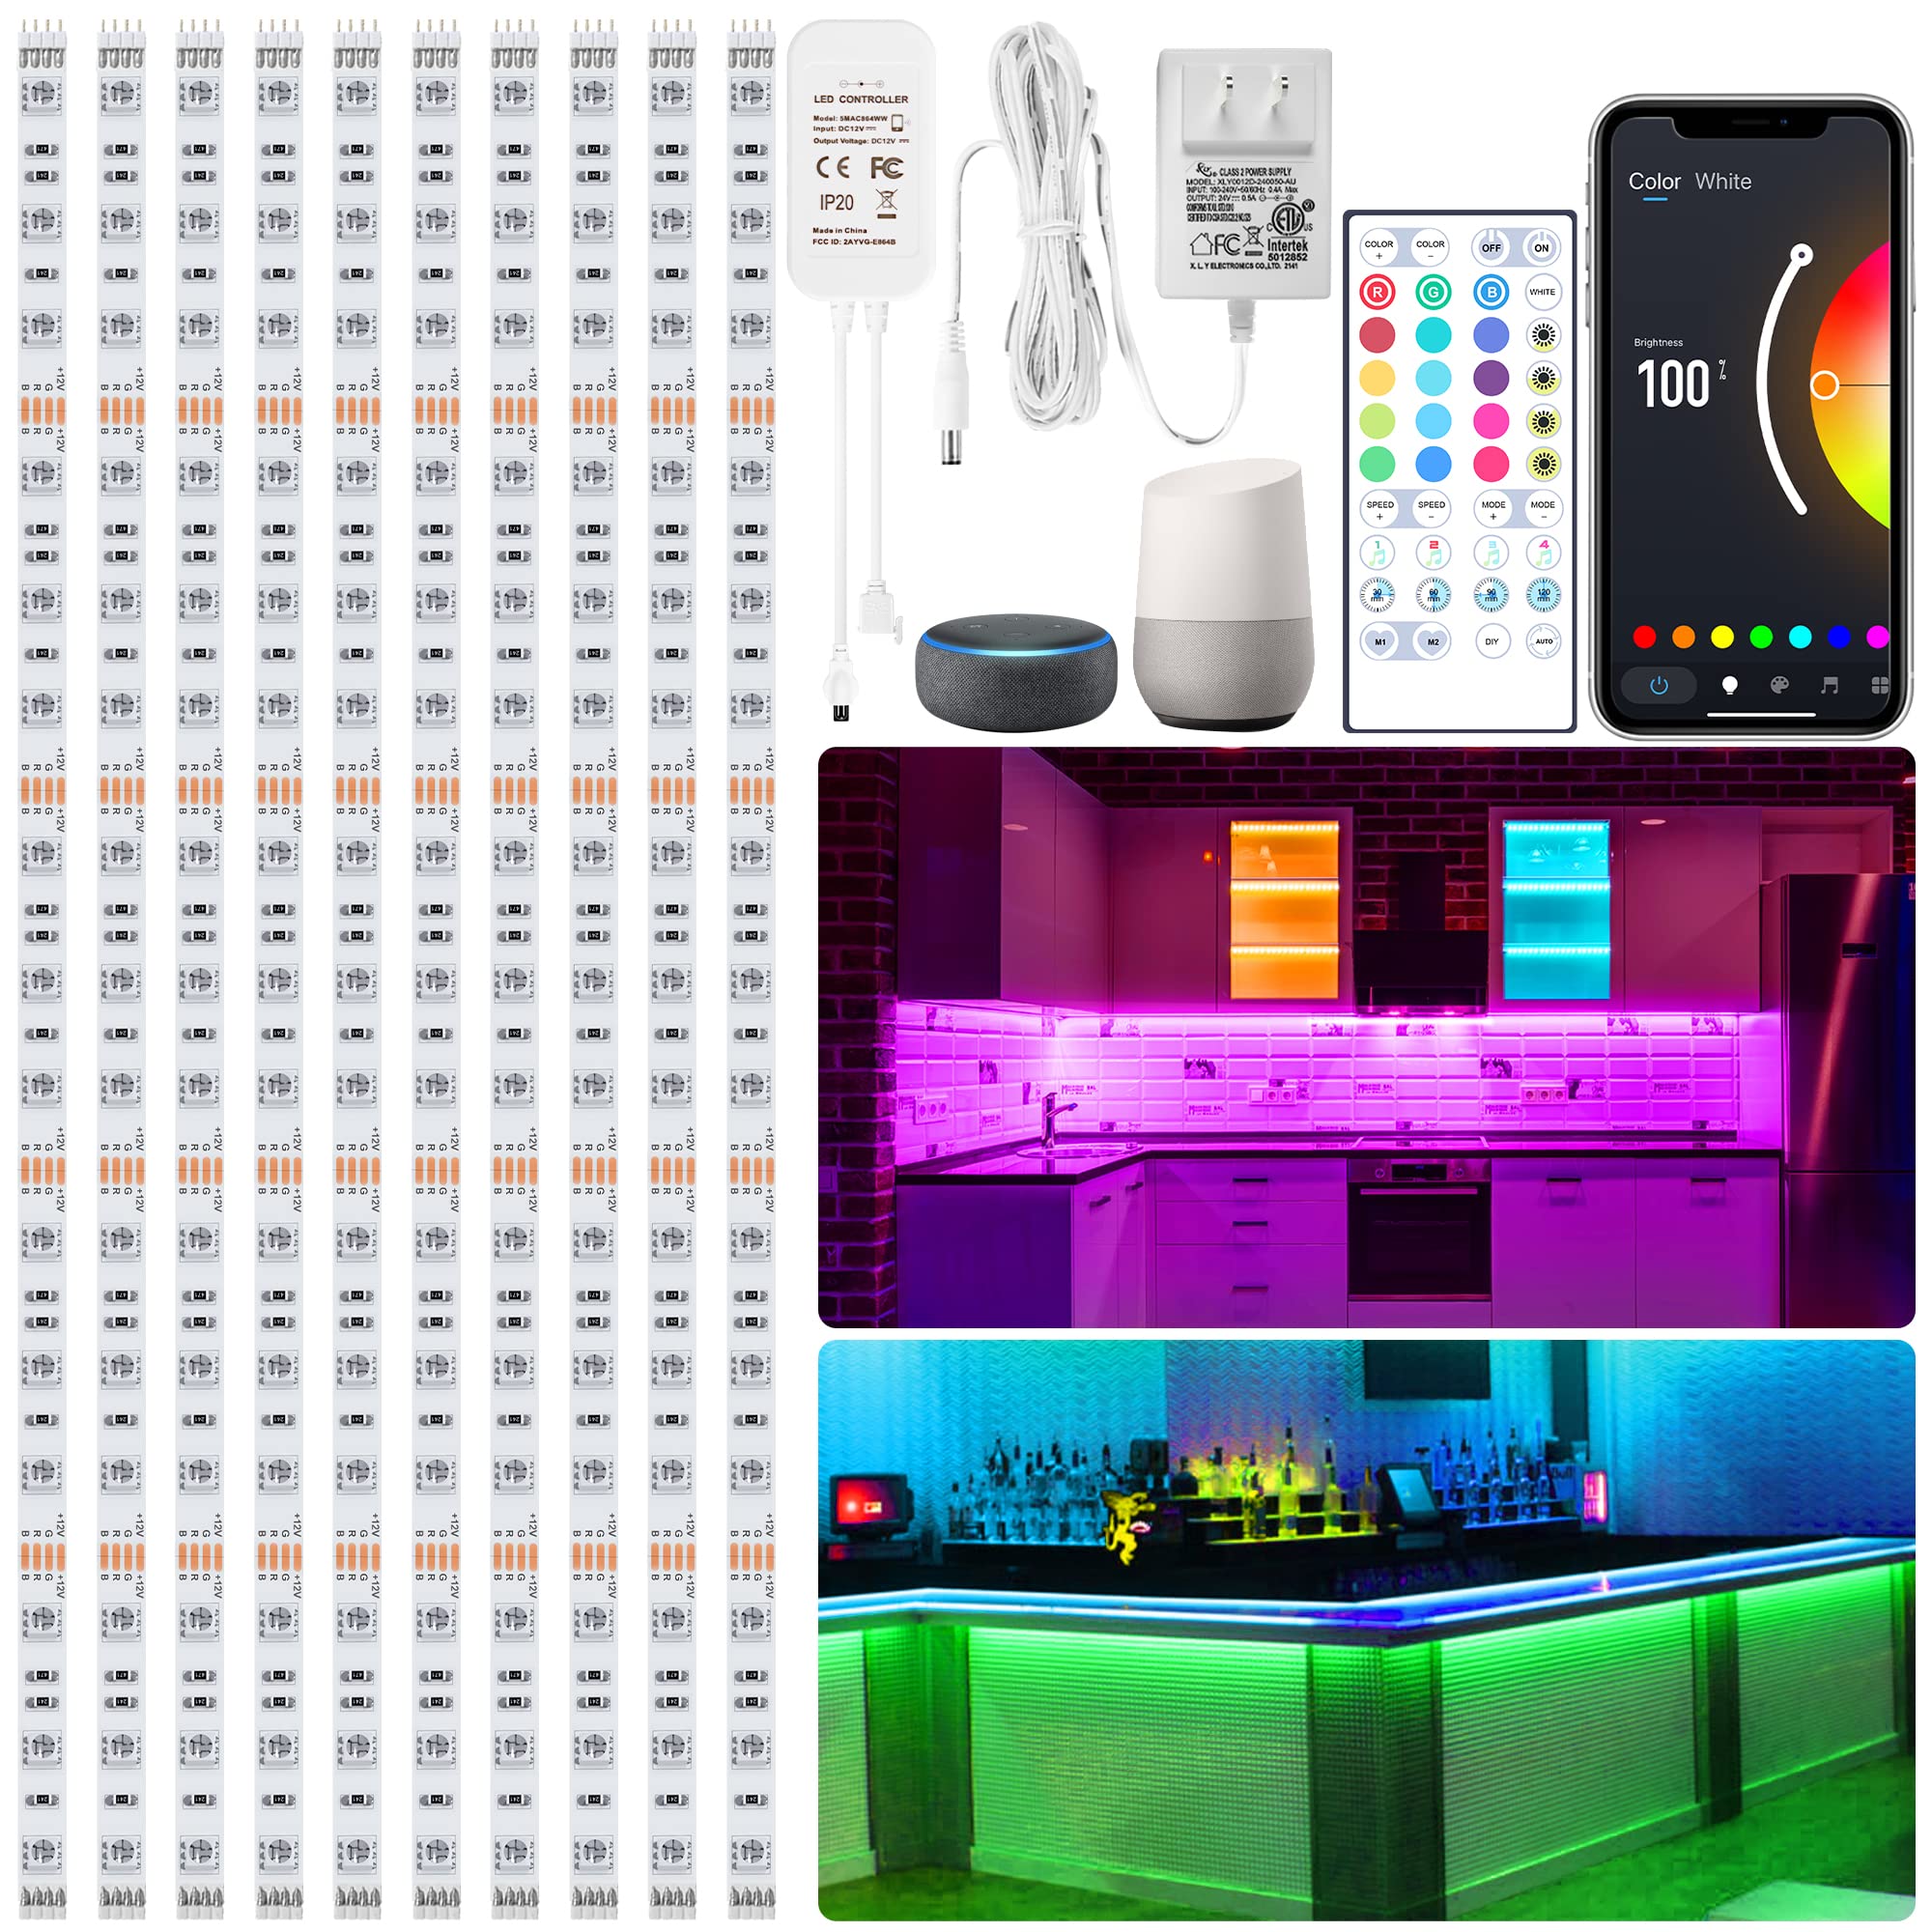 maylit 10 PCS Smart RGB Under Cabinet Lights Kit, Work with Alexa and Google Assistant, App and Remote Control, Music Sync Color Changing, Timer, Dimmable, for Cabinet, Counter, Shelf, Bookcase